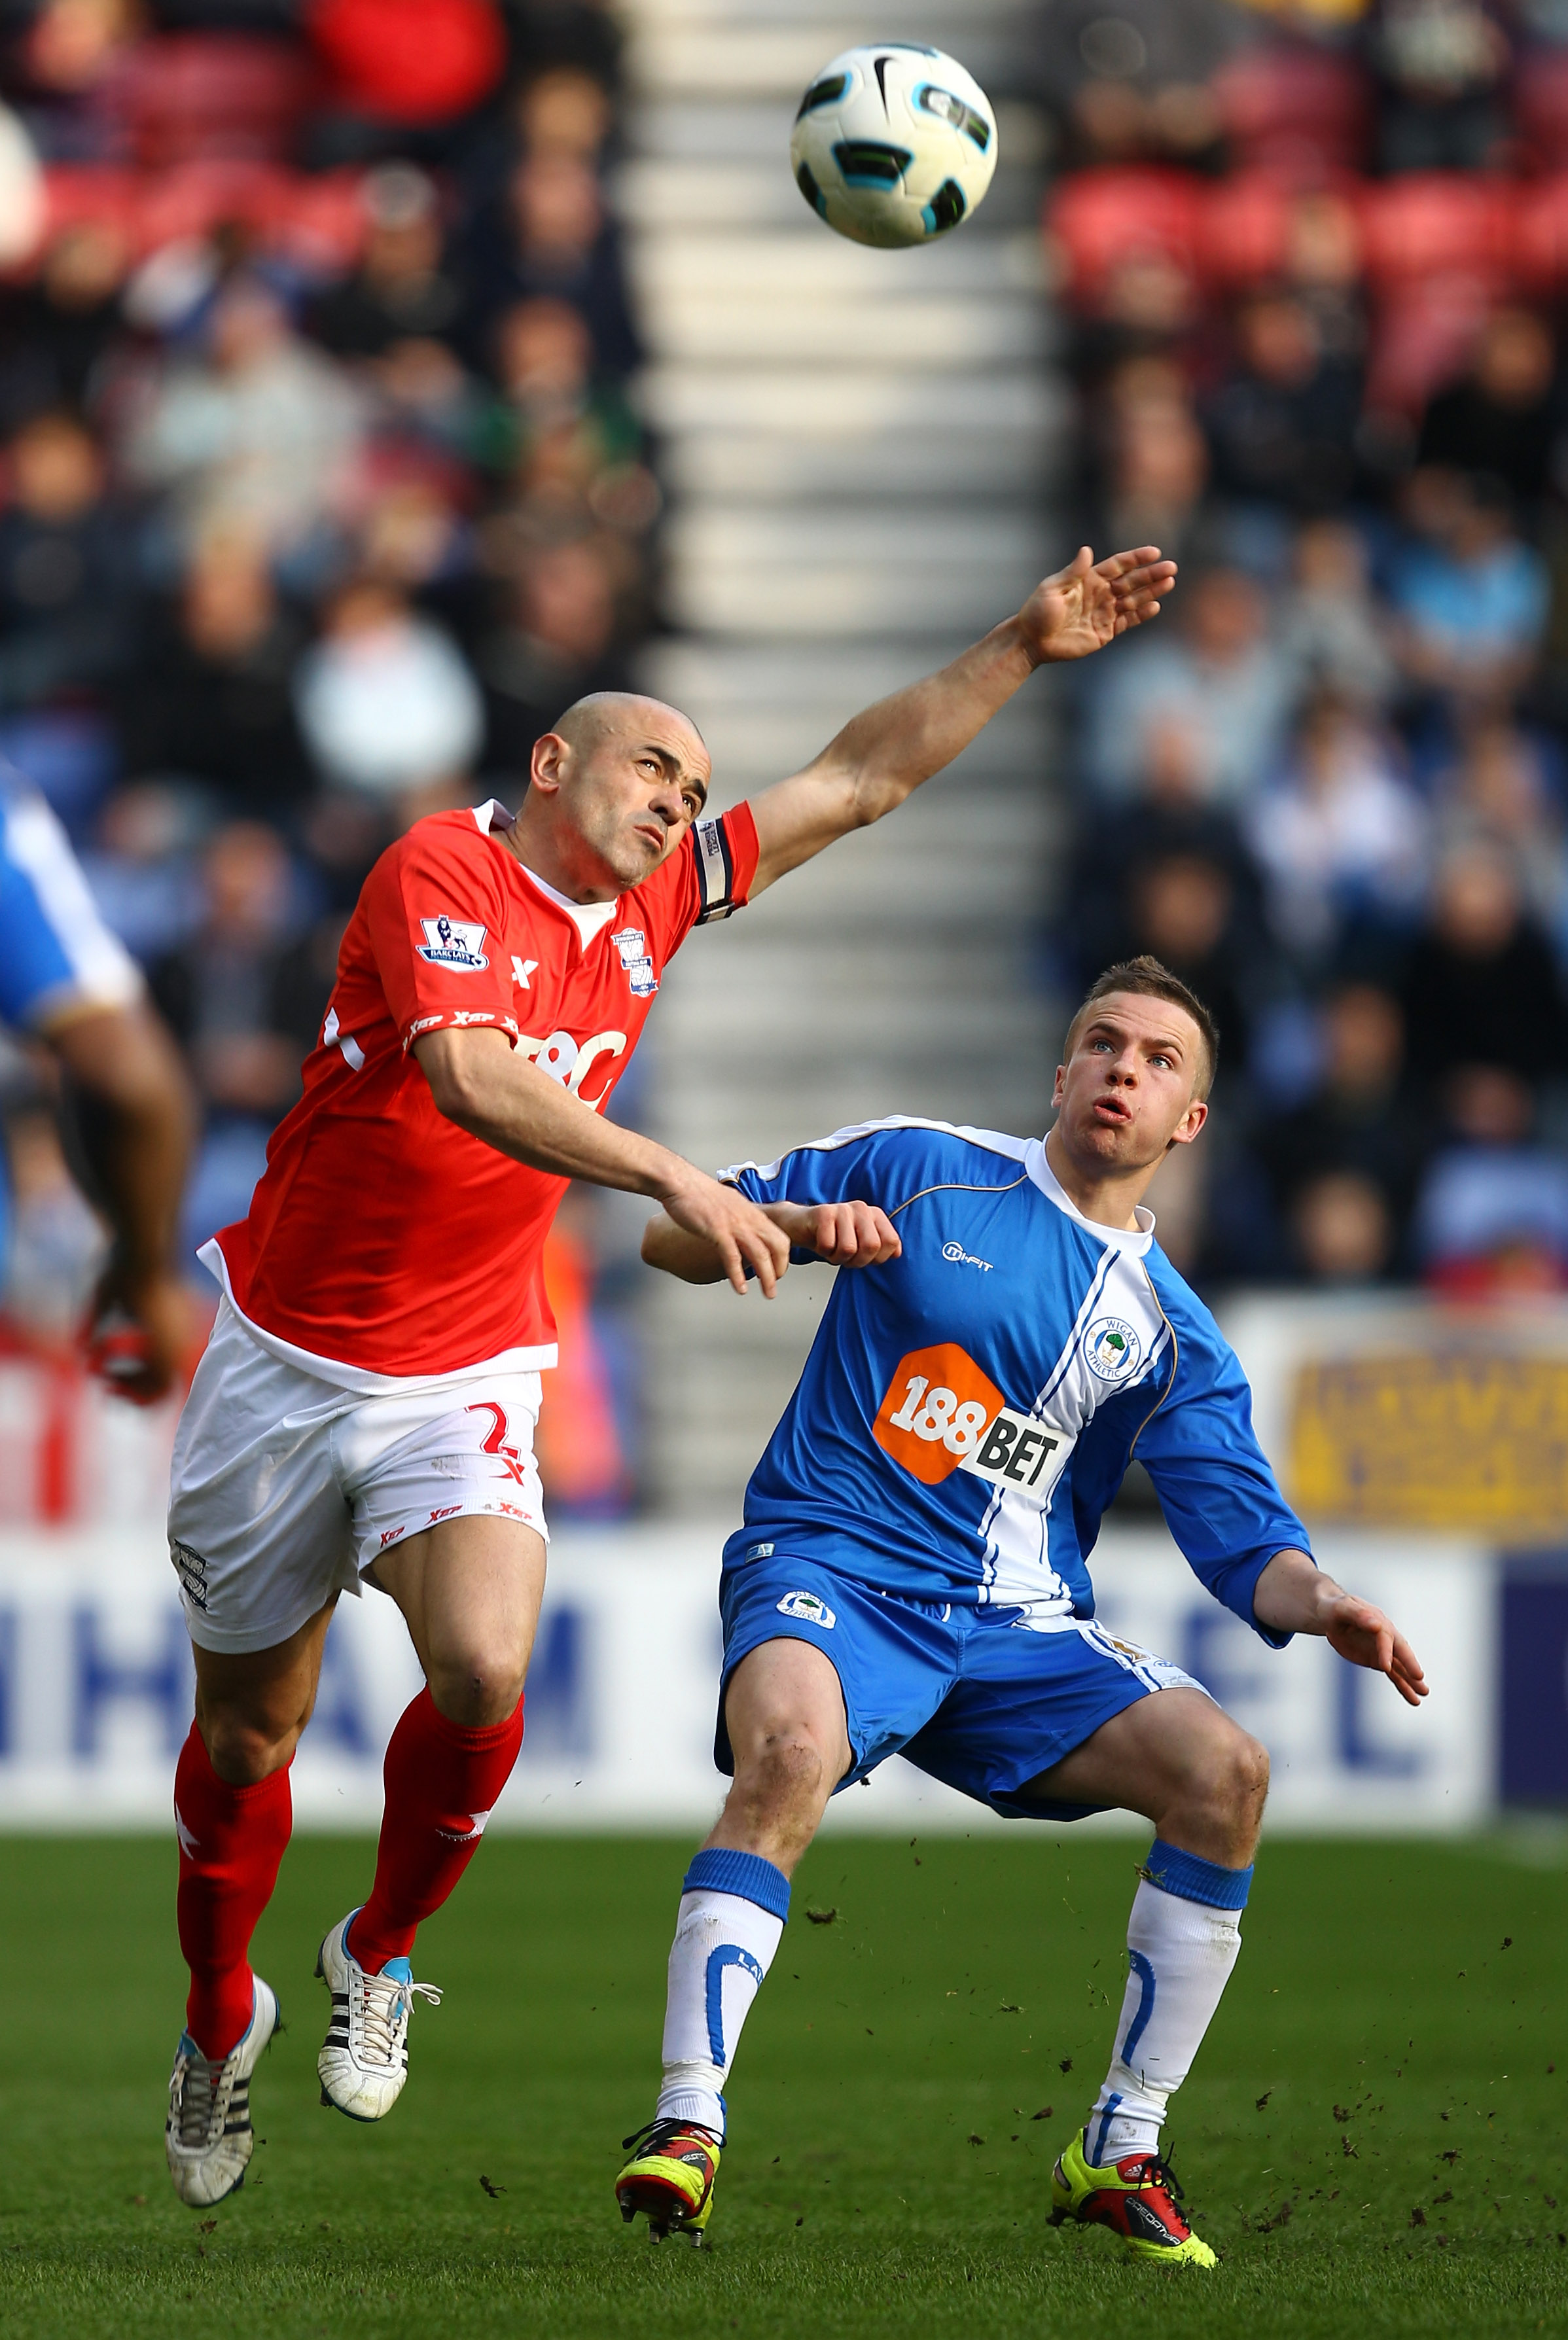 WIGAN, ENGLAND - MARCH 19:  Tom Cleverley of Wigan is tackles Stephen Carr of Birmingham during the Barclays Premier League match between Wigan Athletic and Birmingham City at the DW Stadium on March 19, 2011 in Wigan, England.  (Photo by Richard Heathcot